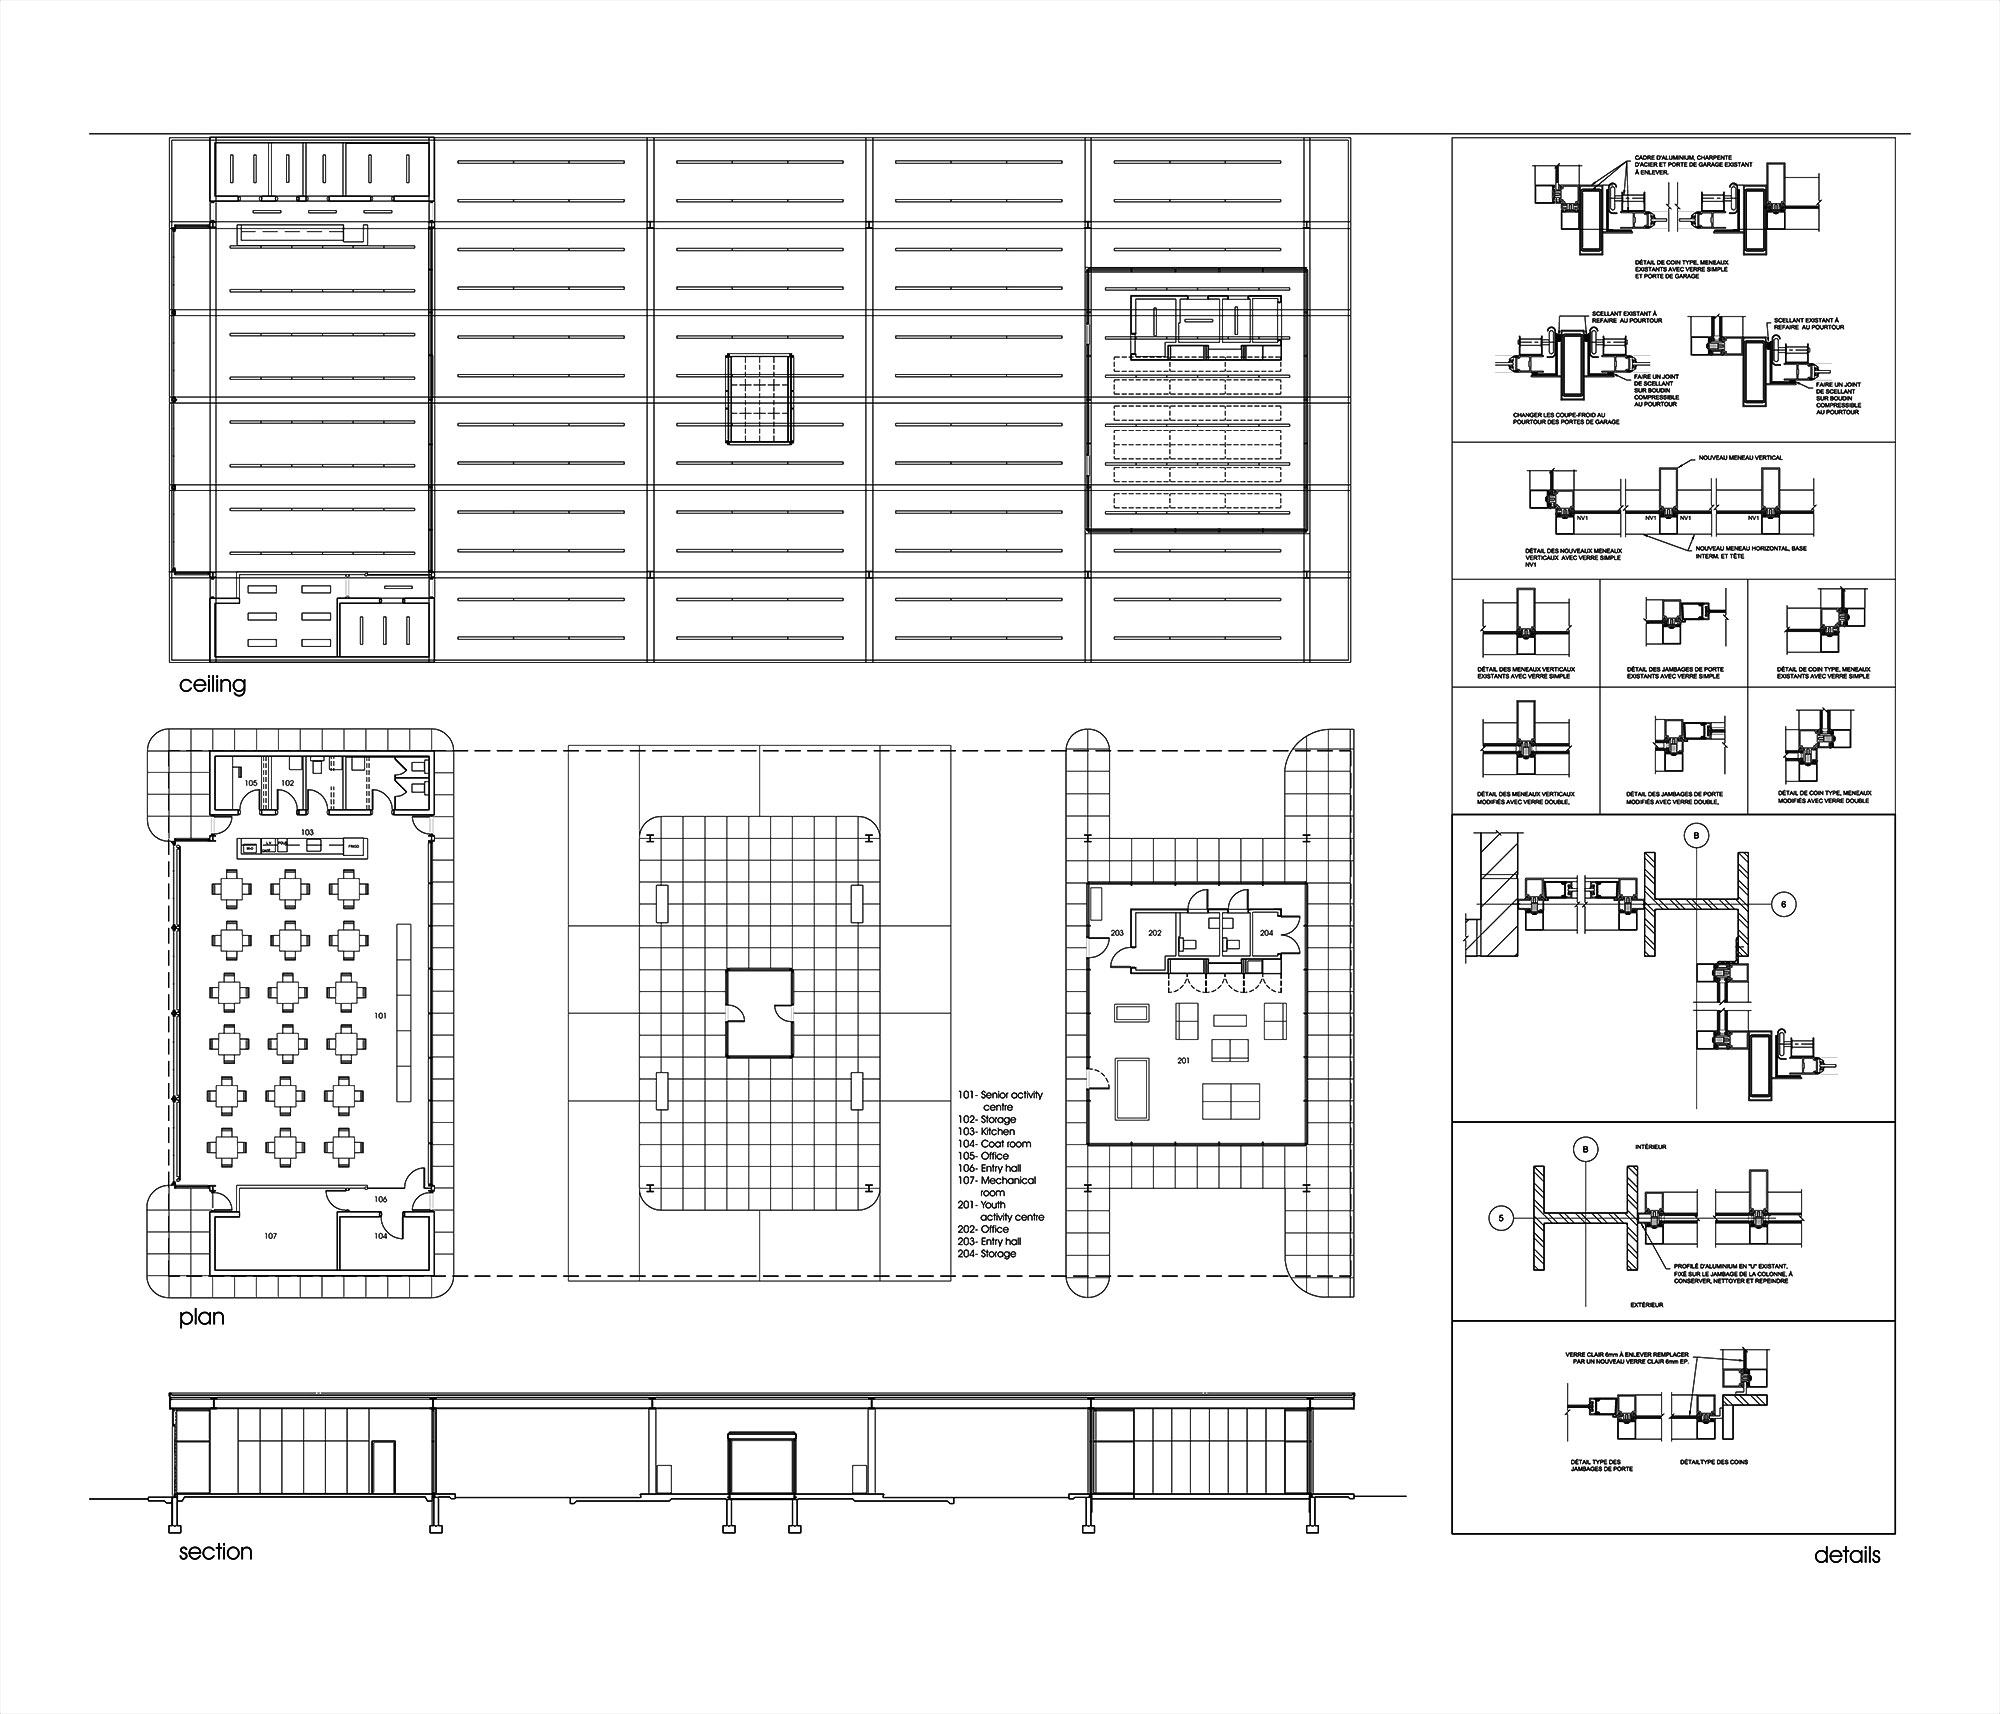 Floor Plans and Sections - Mies van der Rohe Gas Station Conversion on Nuns Island / FABG Architects